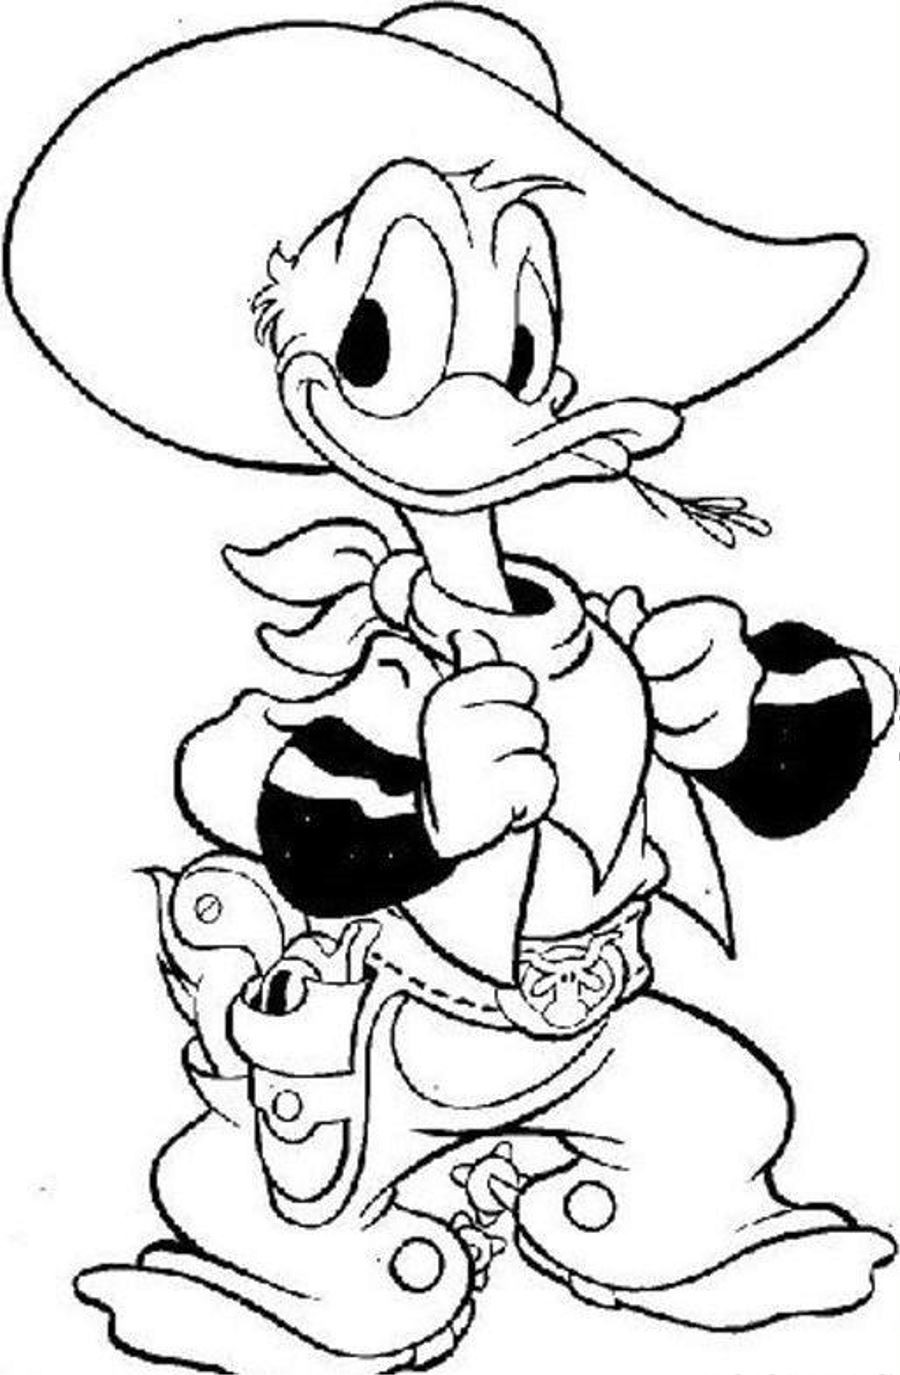 Cowgirl Coloring Pages
 Cowboy Coloring Pages